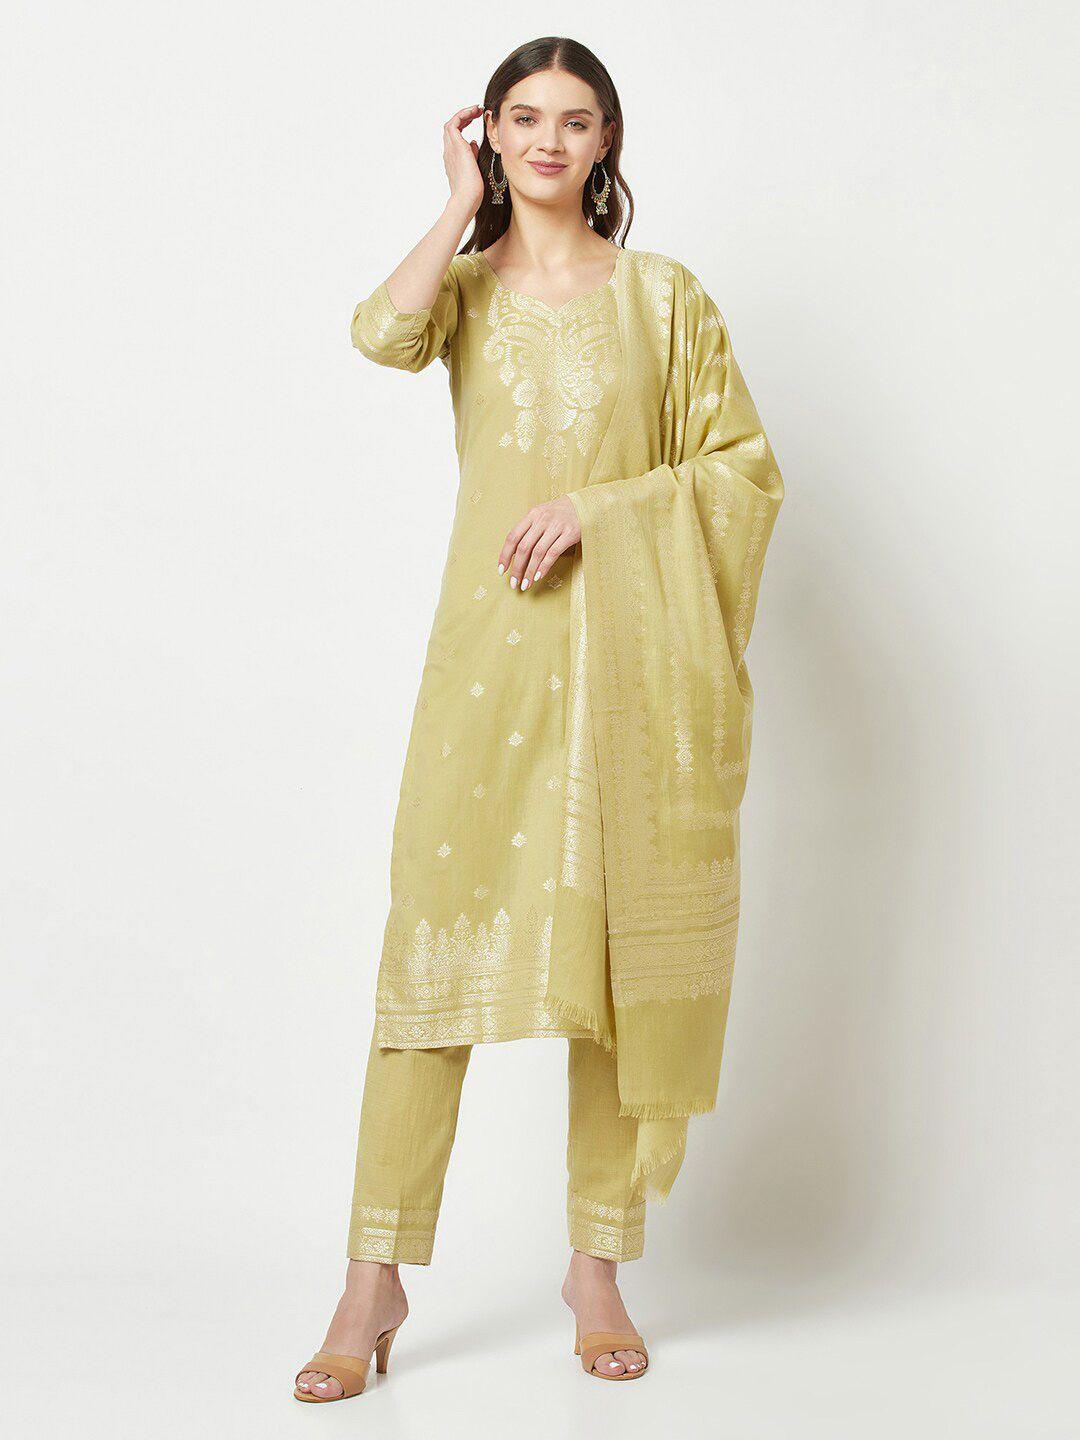 femloom-ethnic-motifs-printed-pure-cotton-unstitched-dress-material